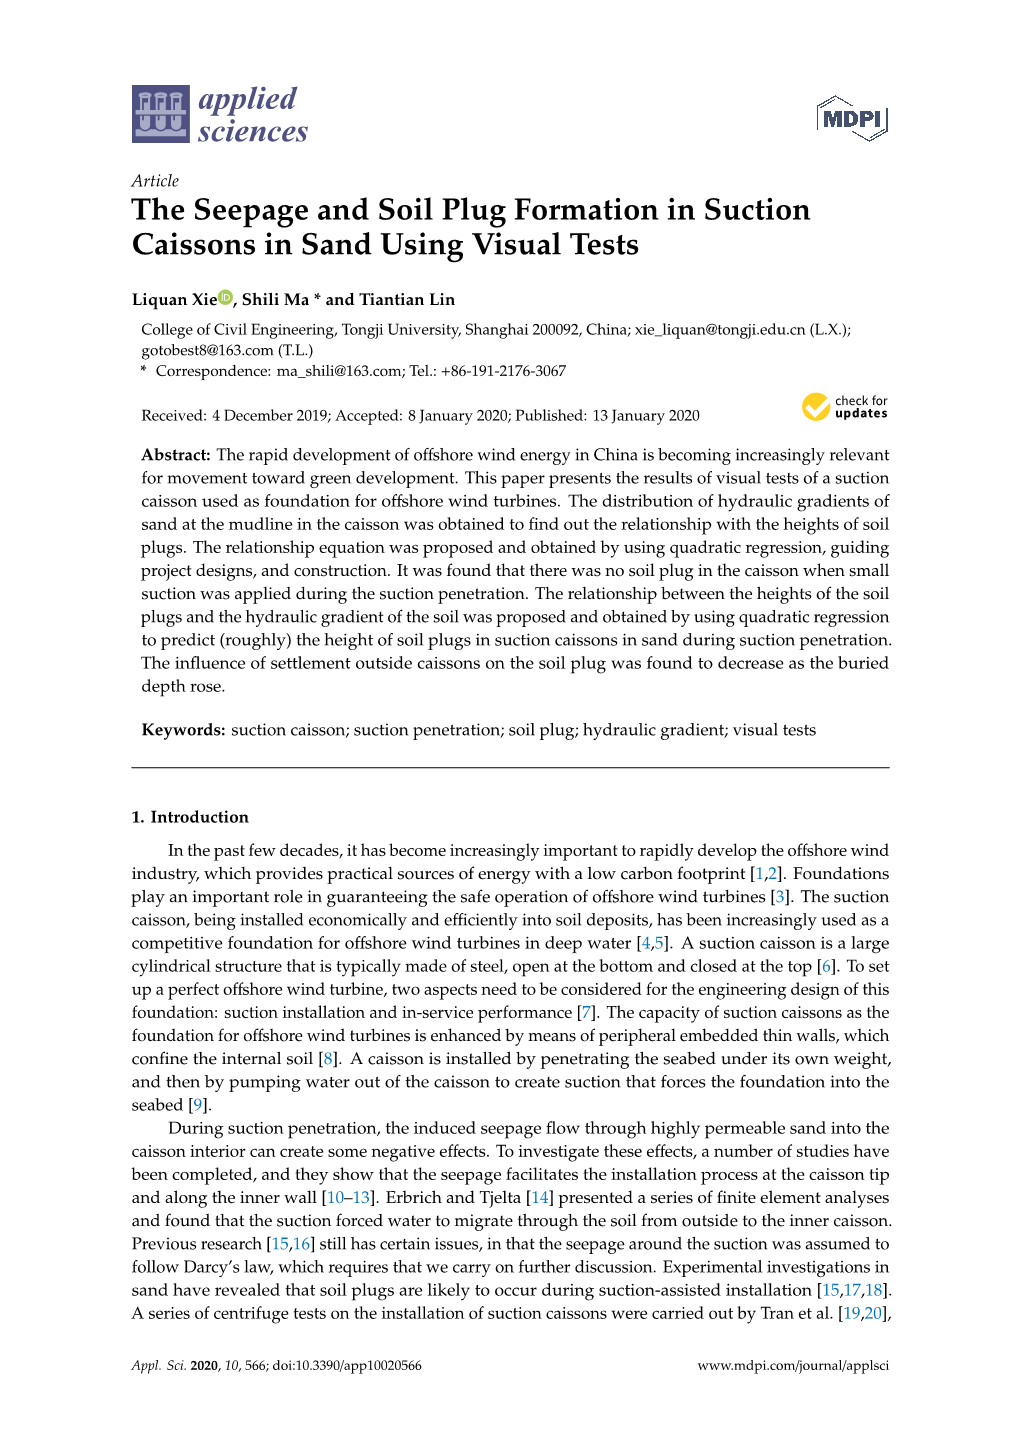 The Seepage and Soil Plug Formation in Suction Caissons in Sand Using Visual Tests